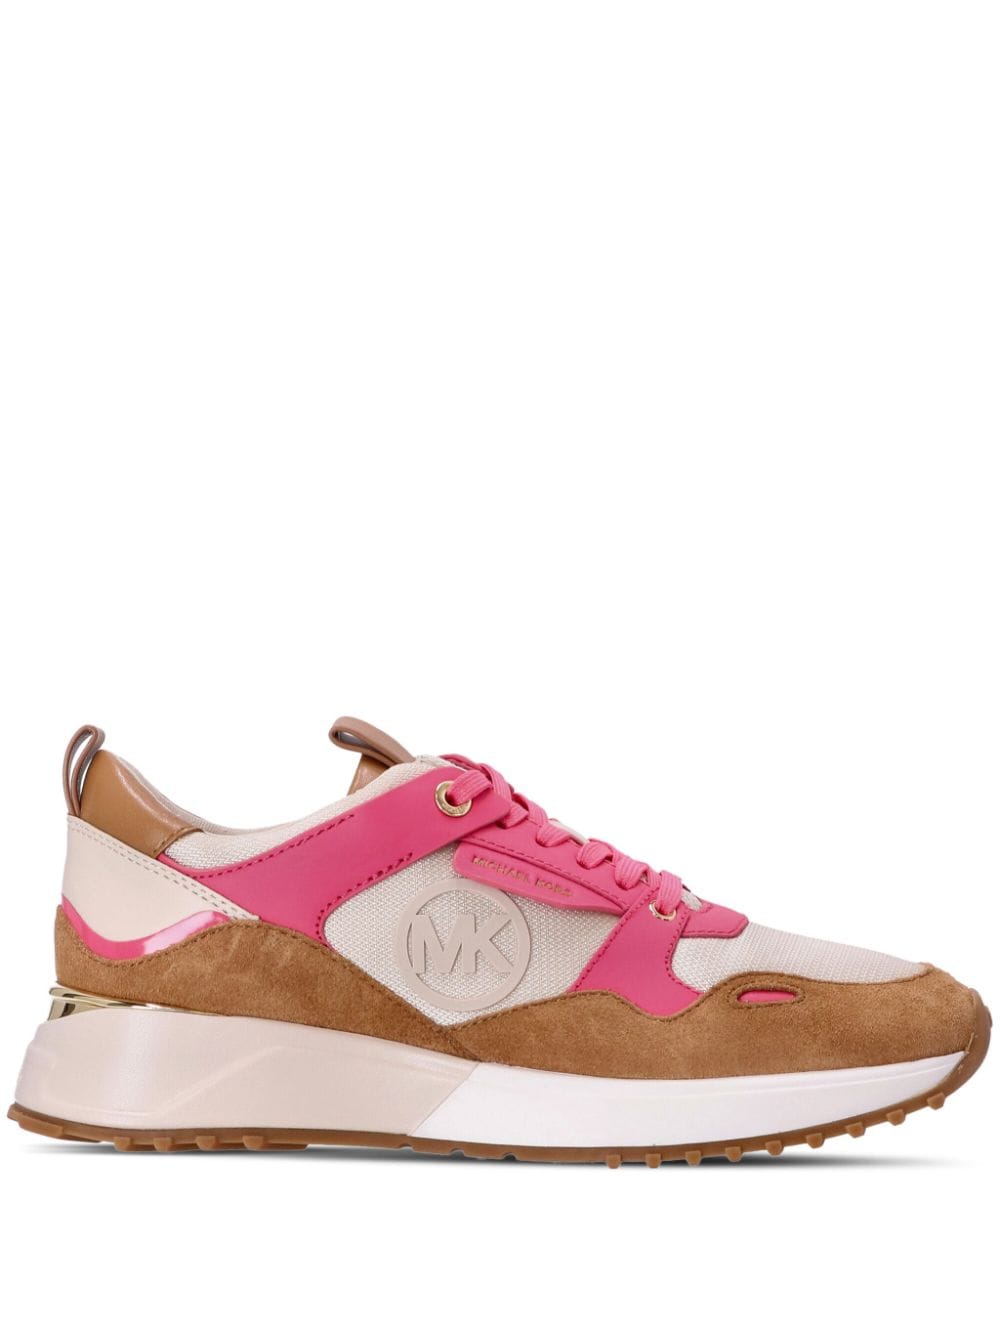 Image 1 of Michael Kors Theo panelled sneakers